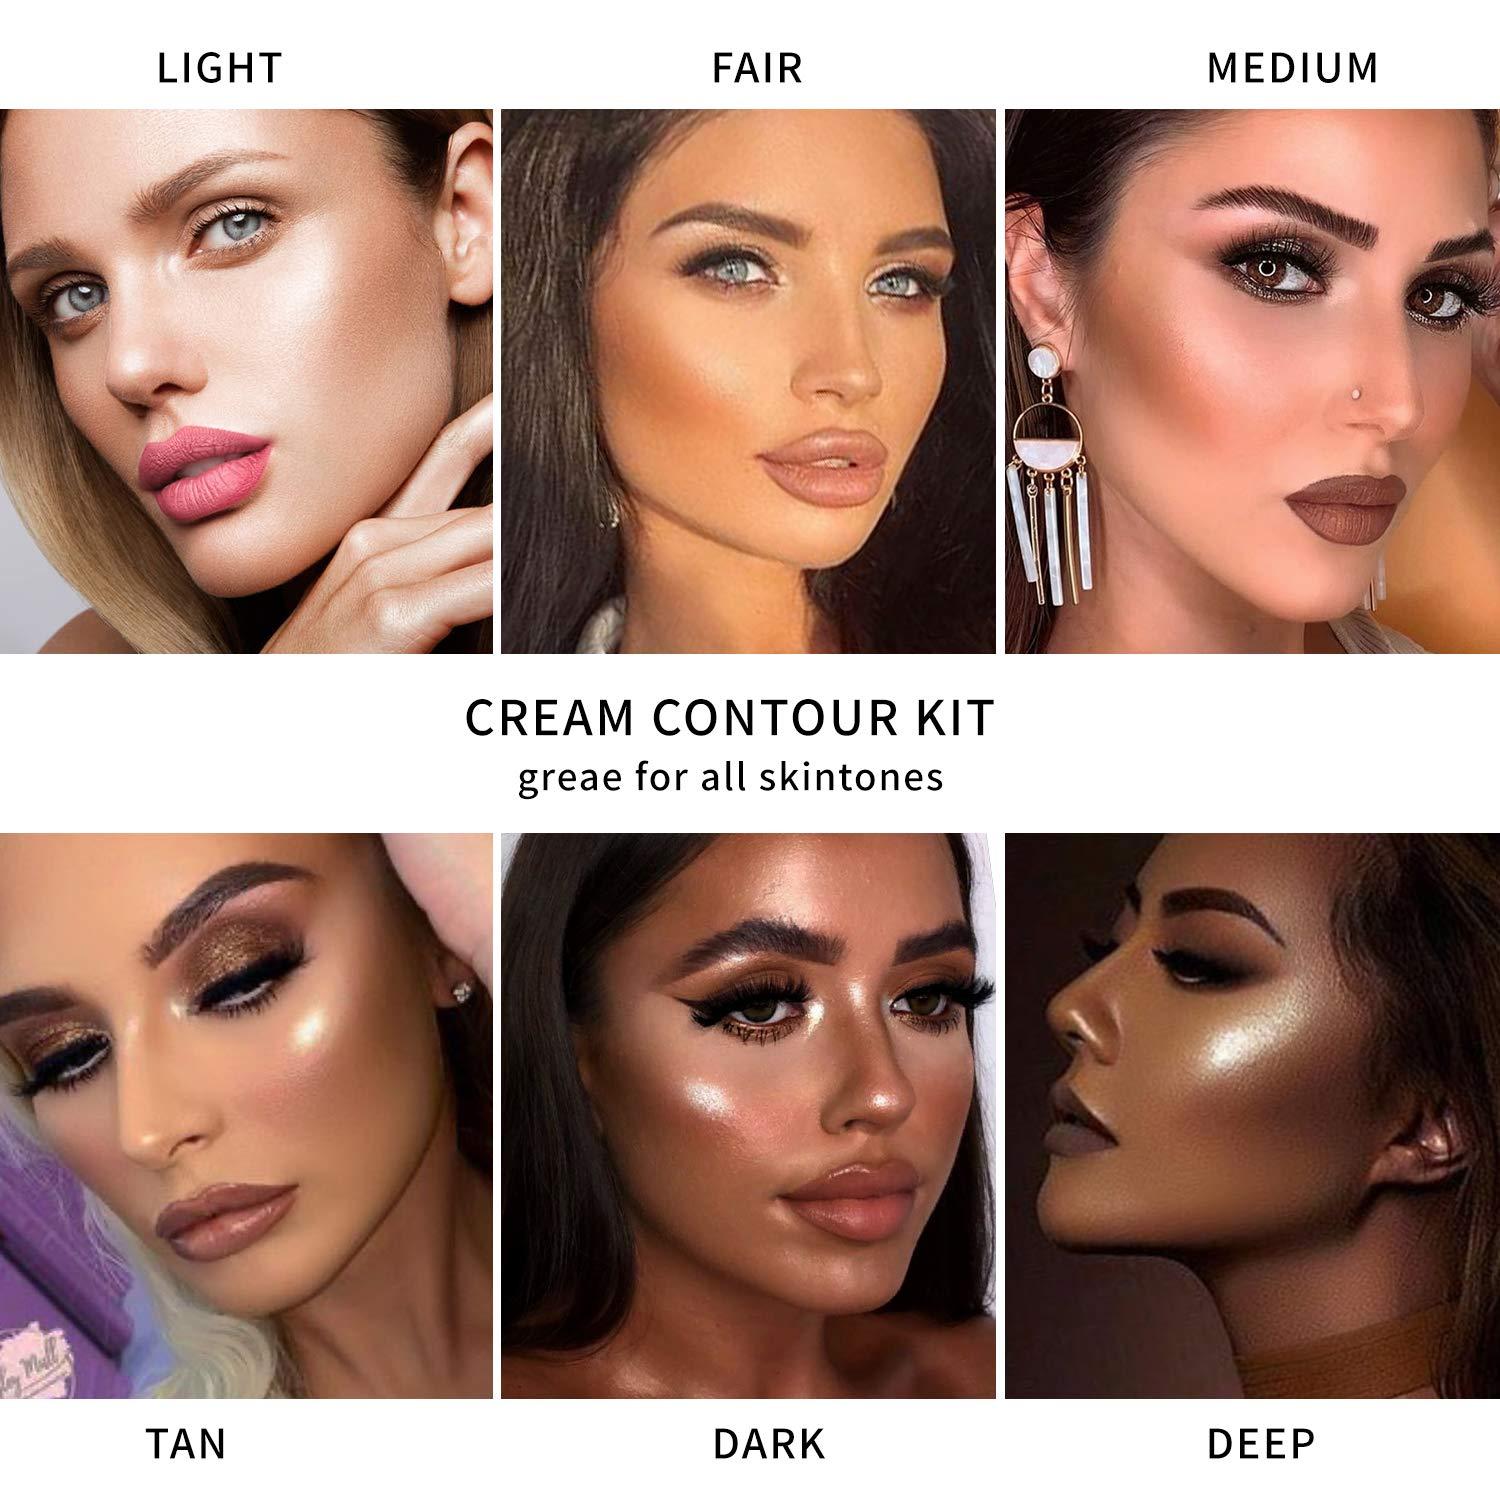 HOW TO HIGHLIGHT AND CONTOUR WITH CREAM PRODUCTS